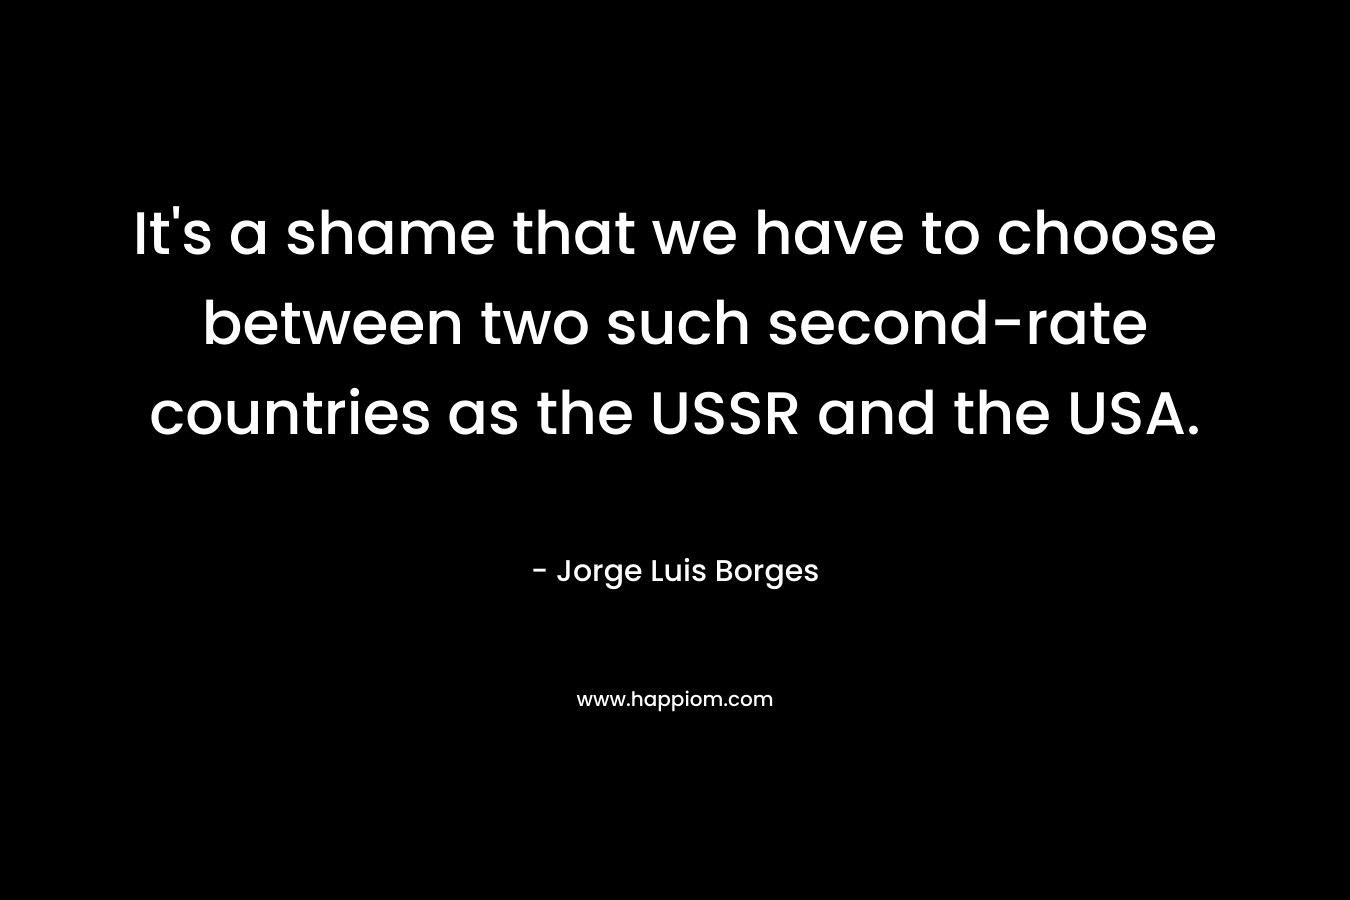 It's a shame that we have to choose between two such second-rate countries as the USSR and the USA.